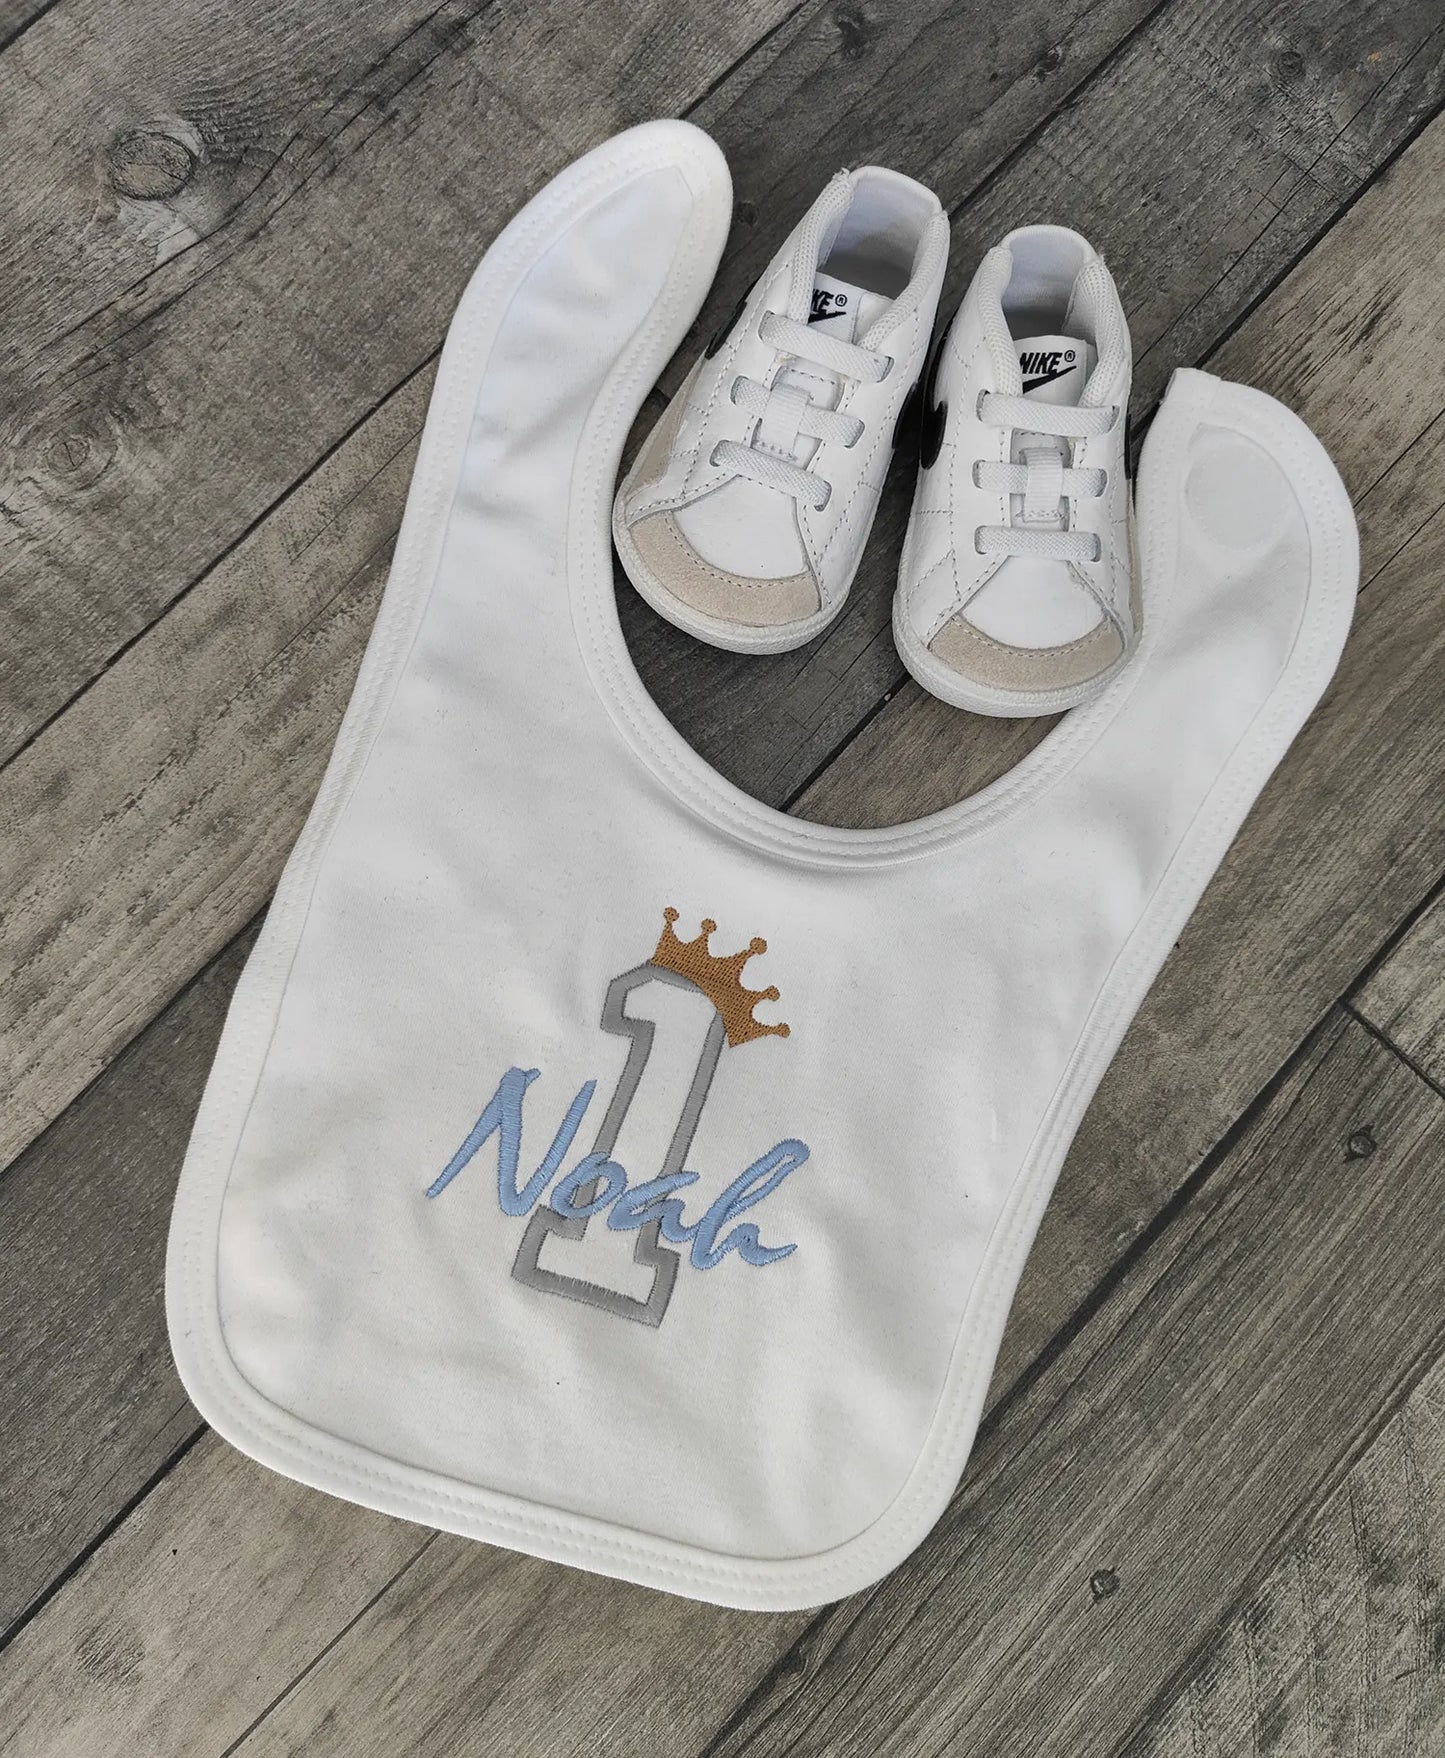 Age & Name Personalised Embroidered Baby Bib